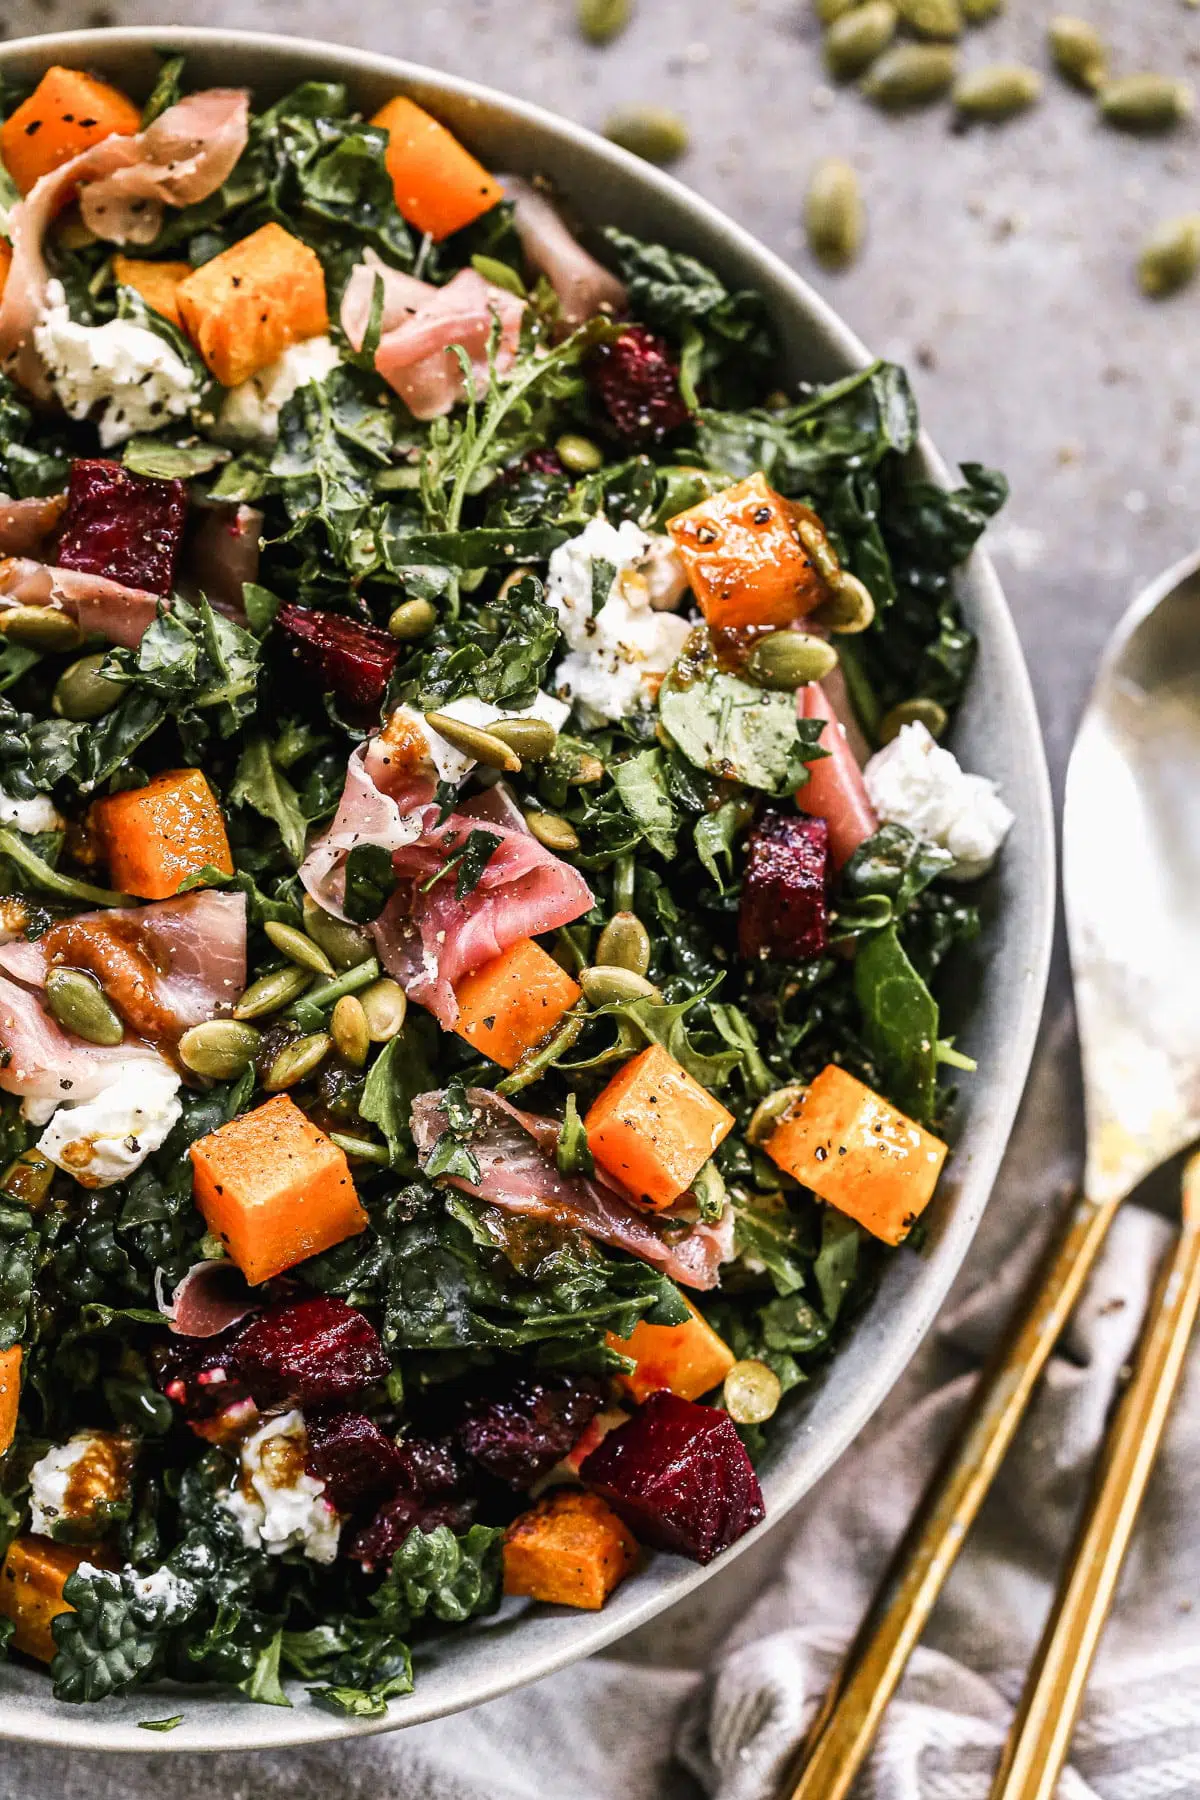 If you pick one salad to make on repeat this fall, let it be our Roasted Butternut Squash Salad. This fall-forward salad is packed with roasted butternut squash and beets, speckled with creamy goat cheese, crunchy pepita seeds and hand-torn pieces of salty prosciutto. We toss everything in a sweet and savory pumpkin vinaigrette and dig in.